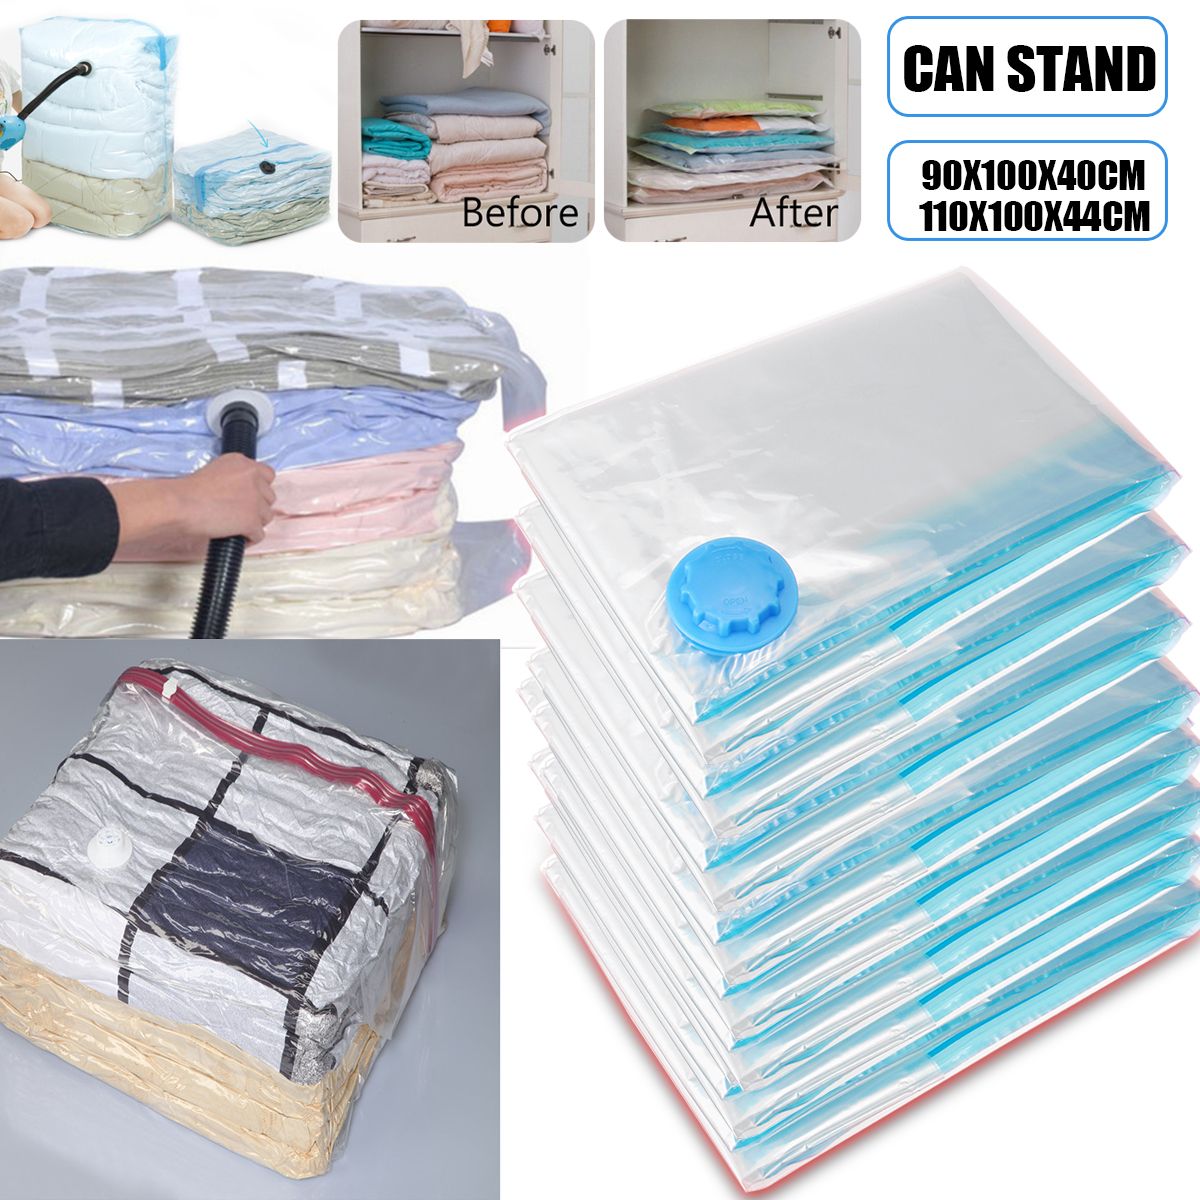 3D-Large-Vacuum-Bag-Clothes-Storage-Bags-Compressed-Organizer-Space-Saver-Dust-Proof-1446369